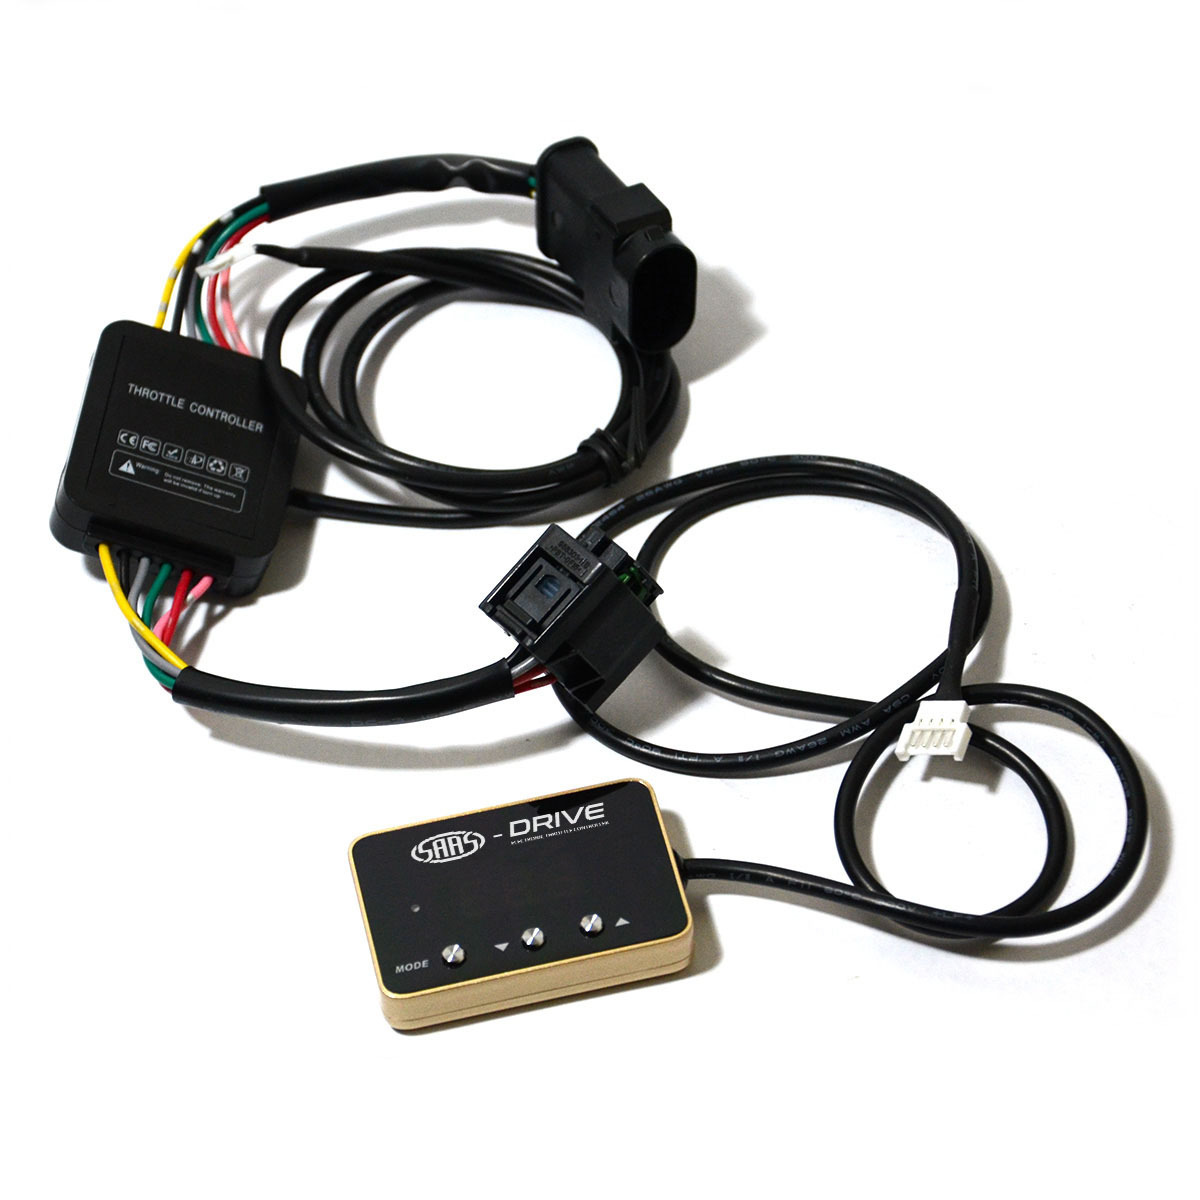 SAAS-Drive Ford F Truck 13th Gen 2015 > Throttle Controller 